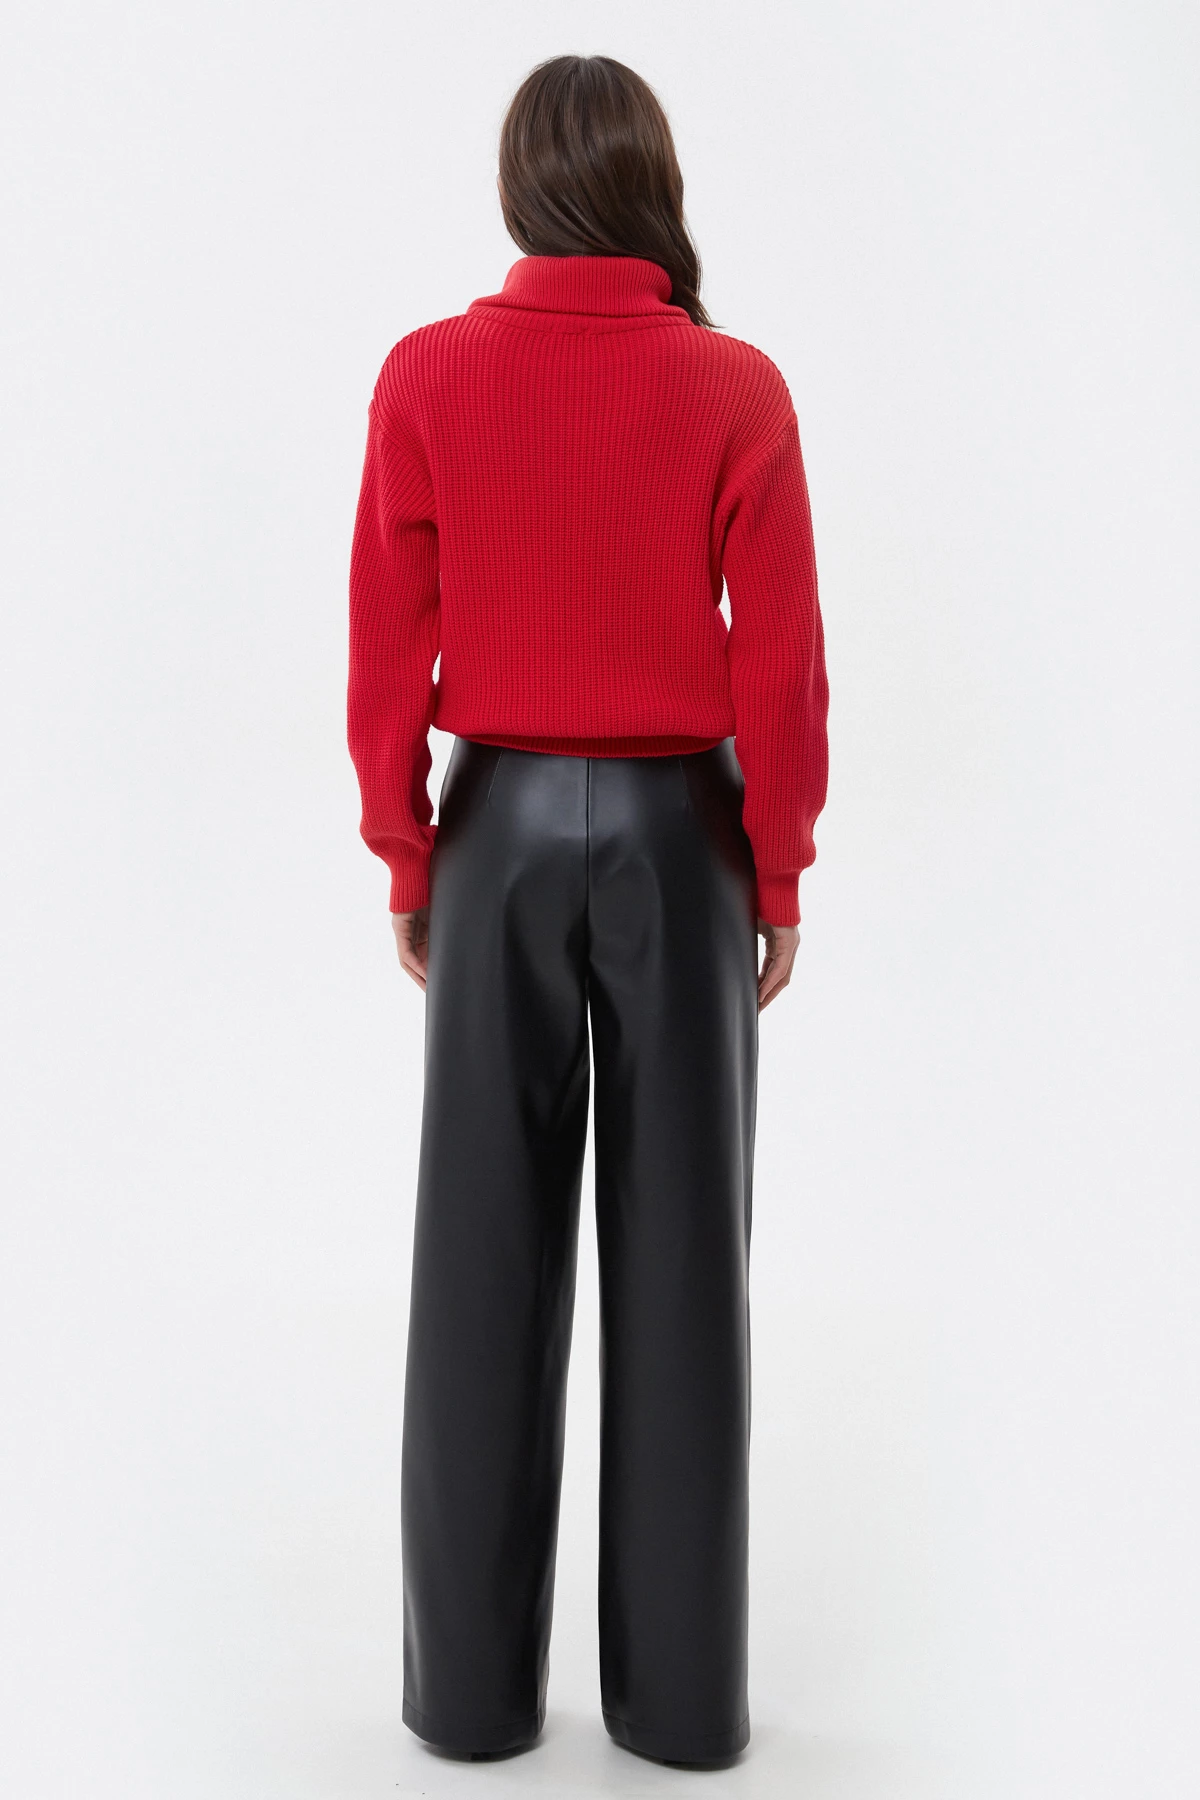 Red cotton zip-up knit sweater, photo 6